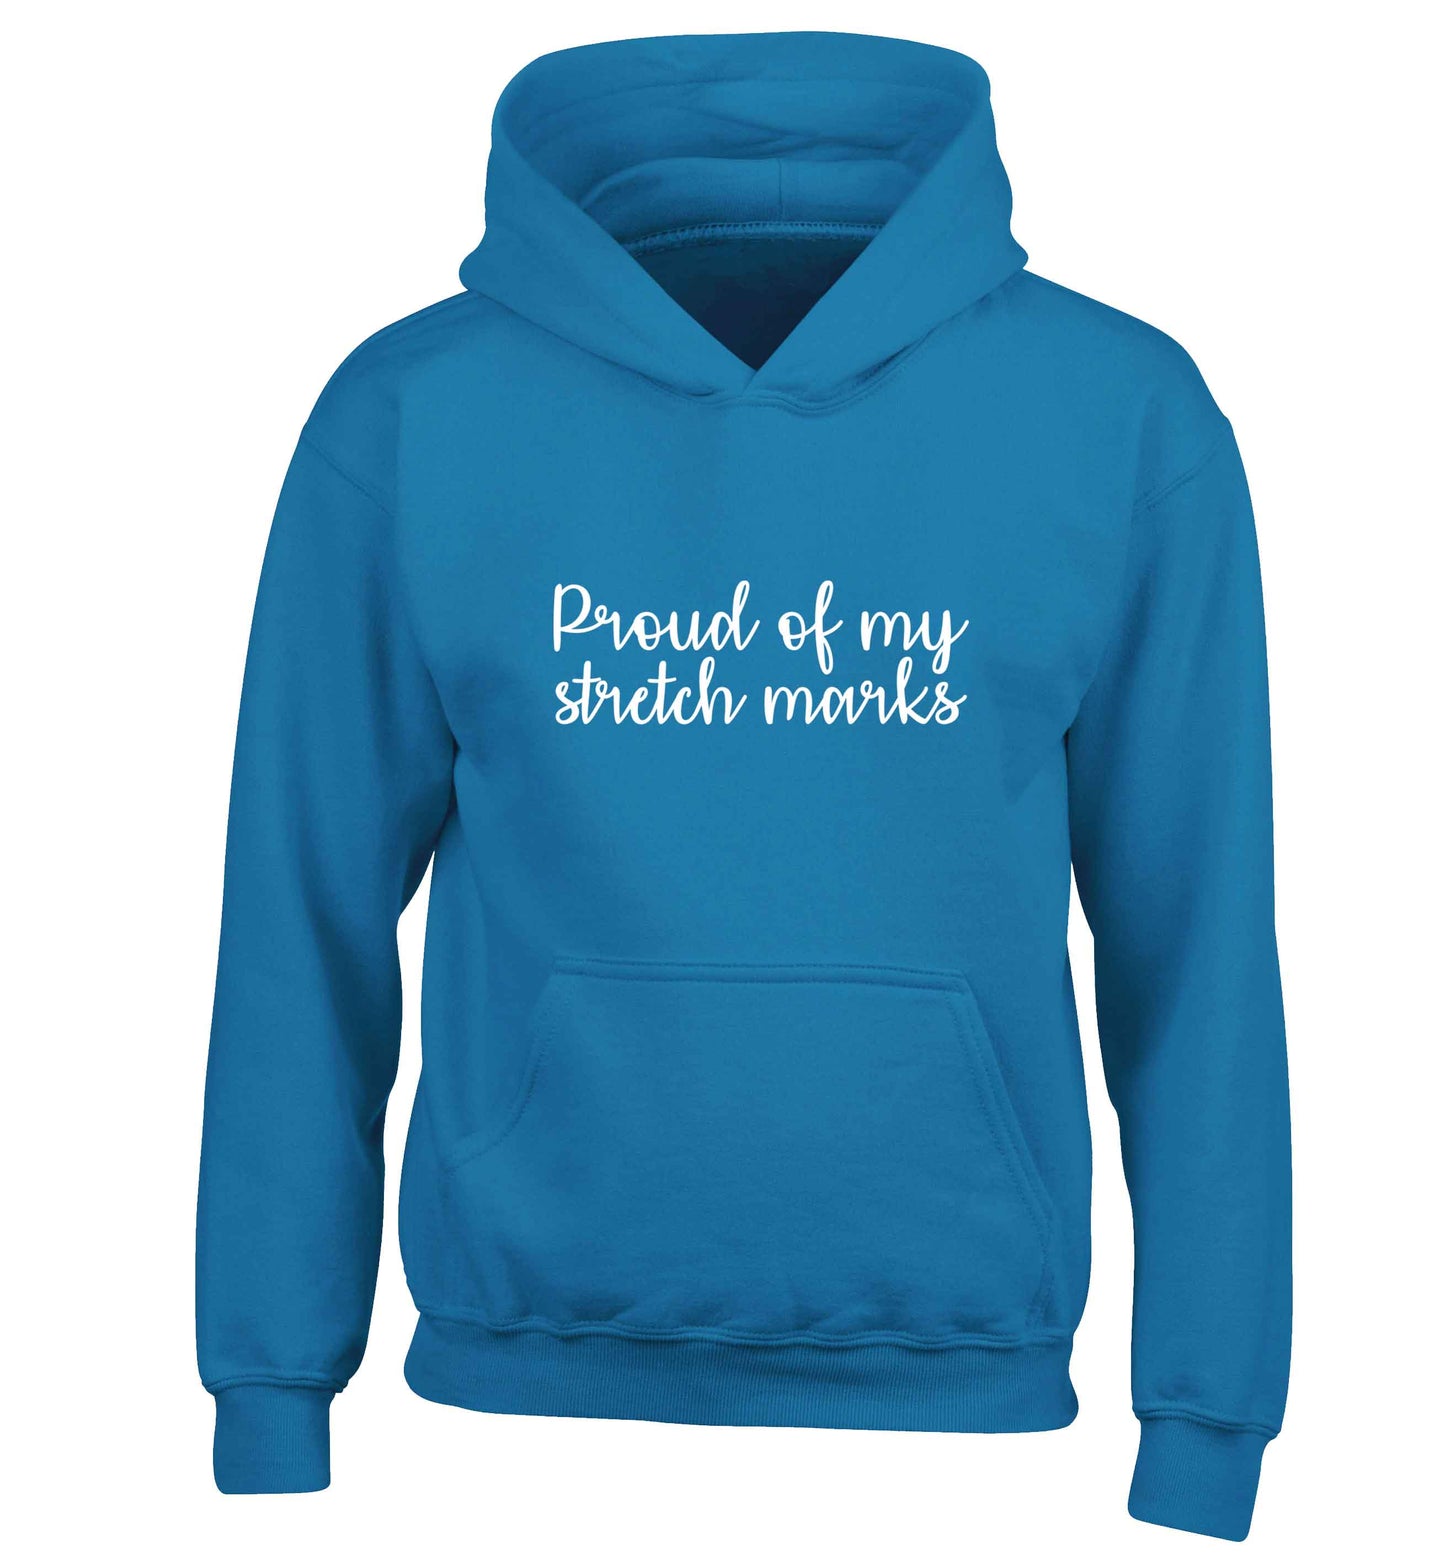 Proud of my stretch marks children's blue hoodie 12-13 Years